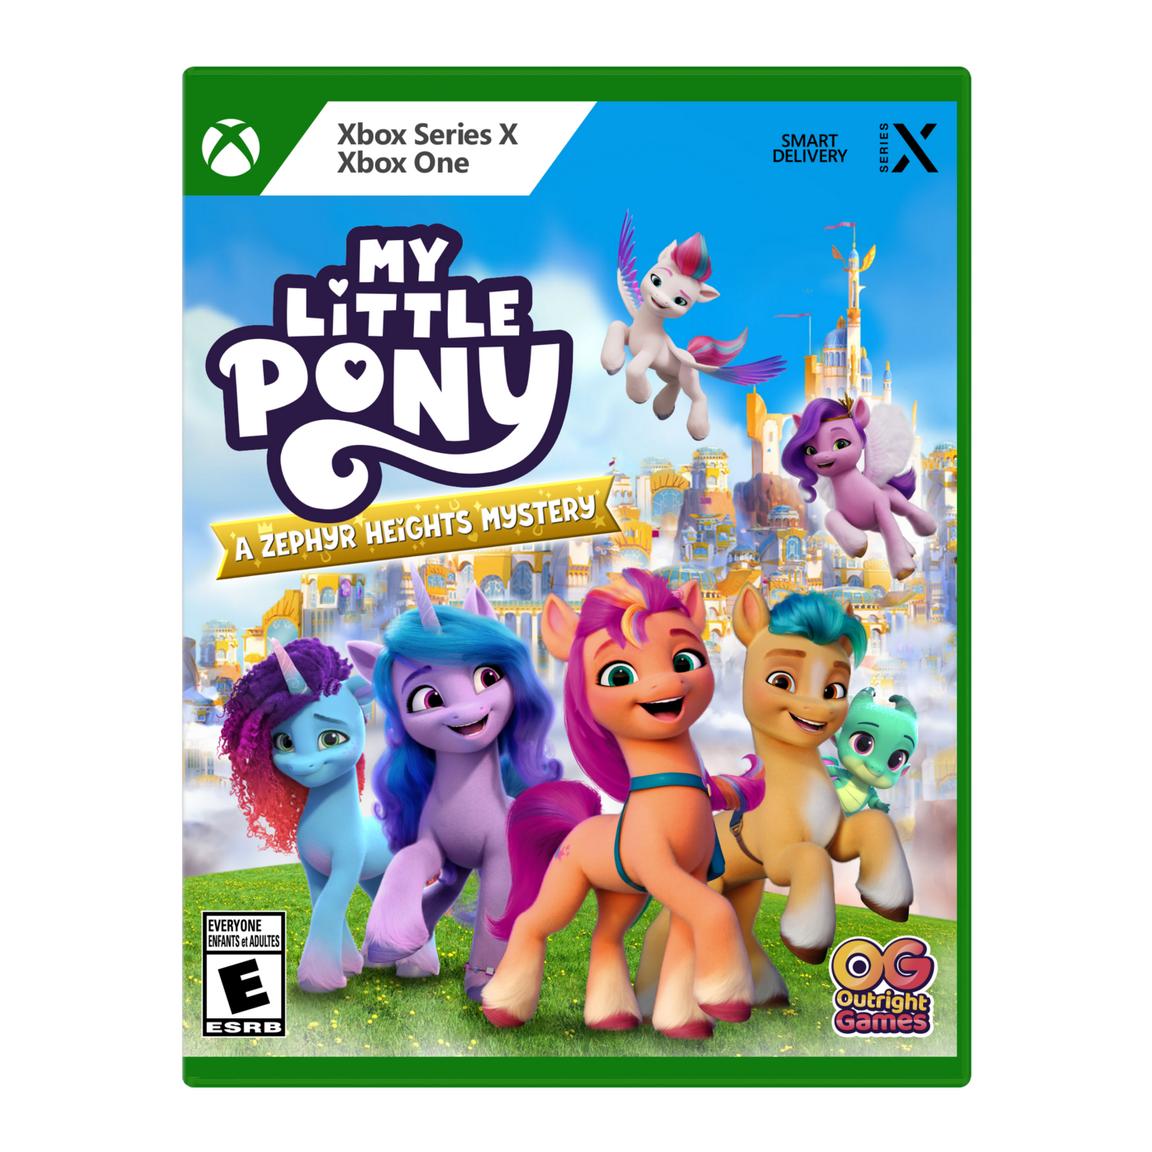 My Little Pony: A Zephyr Heights Mystery - Xbox Series X, Xbox One